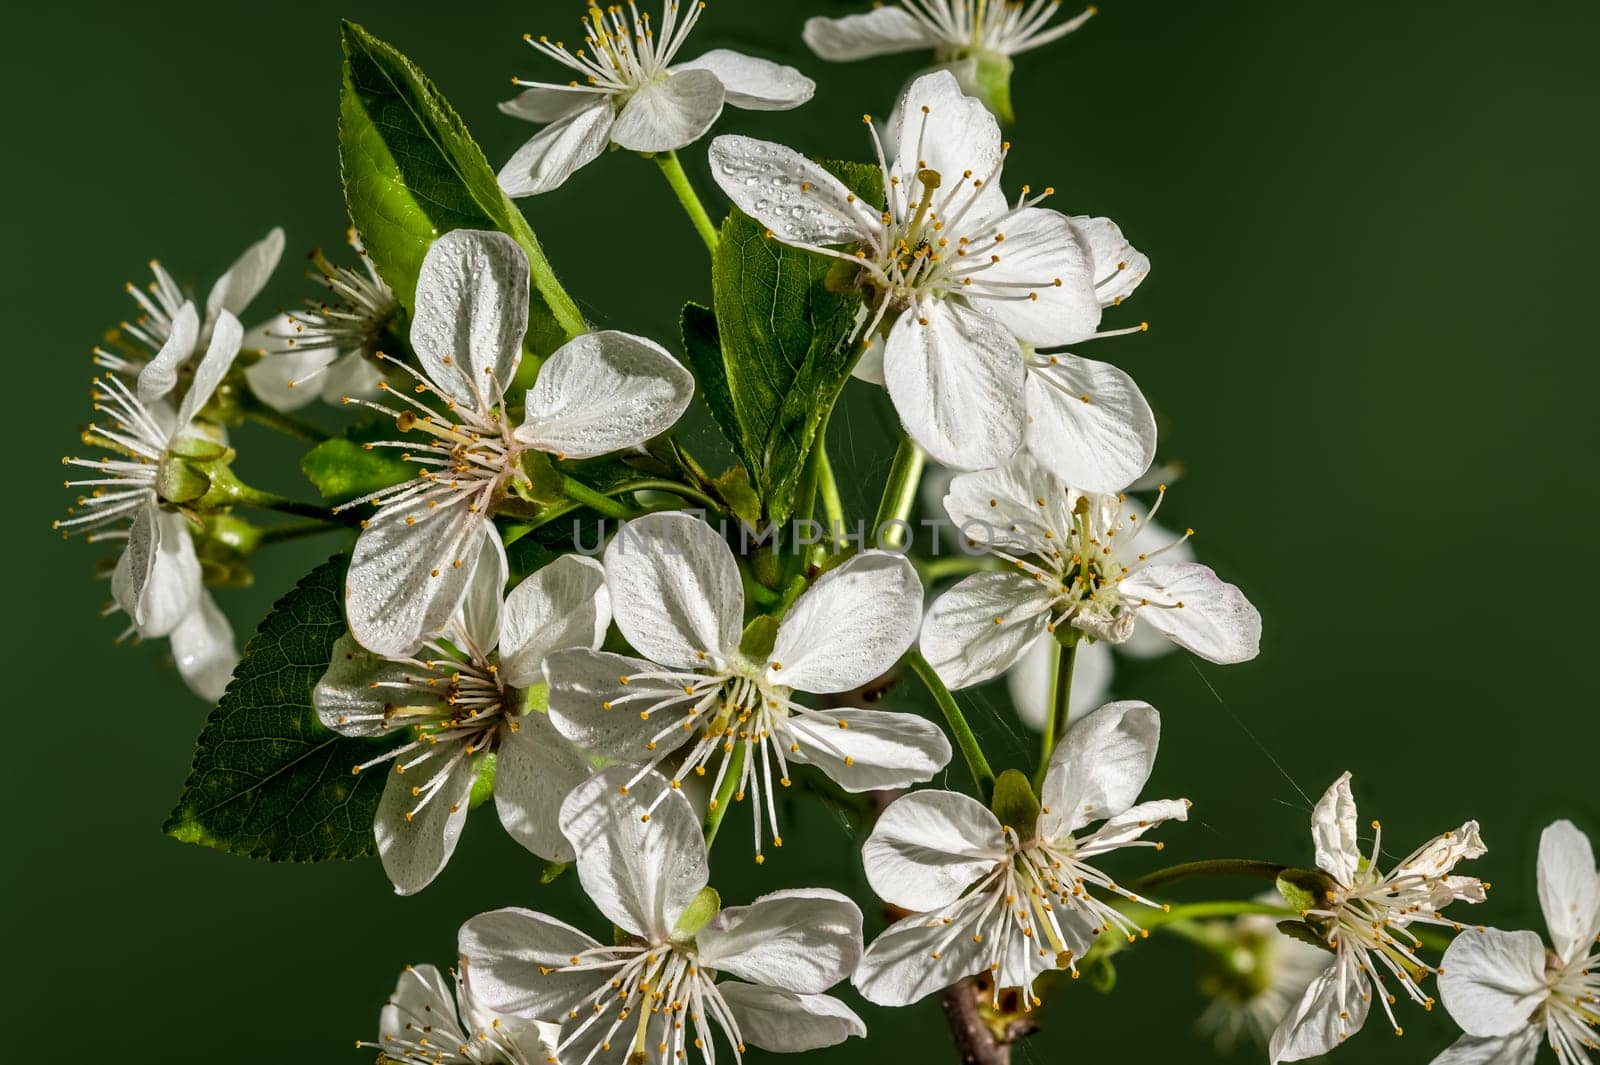 Blooming white cherry tree flowers on a green background by Multipedia